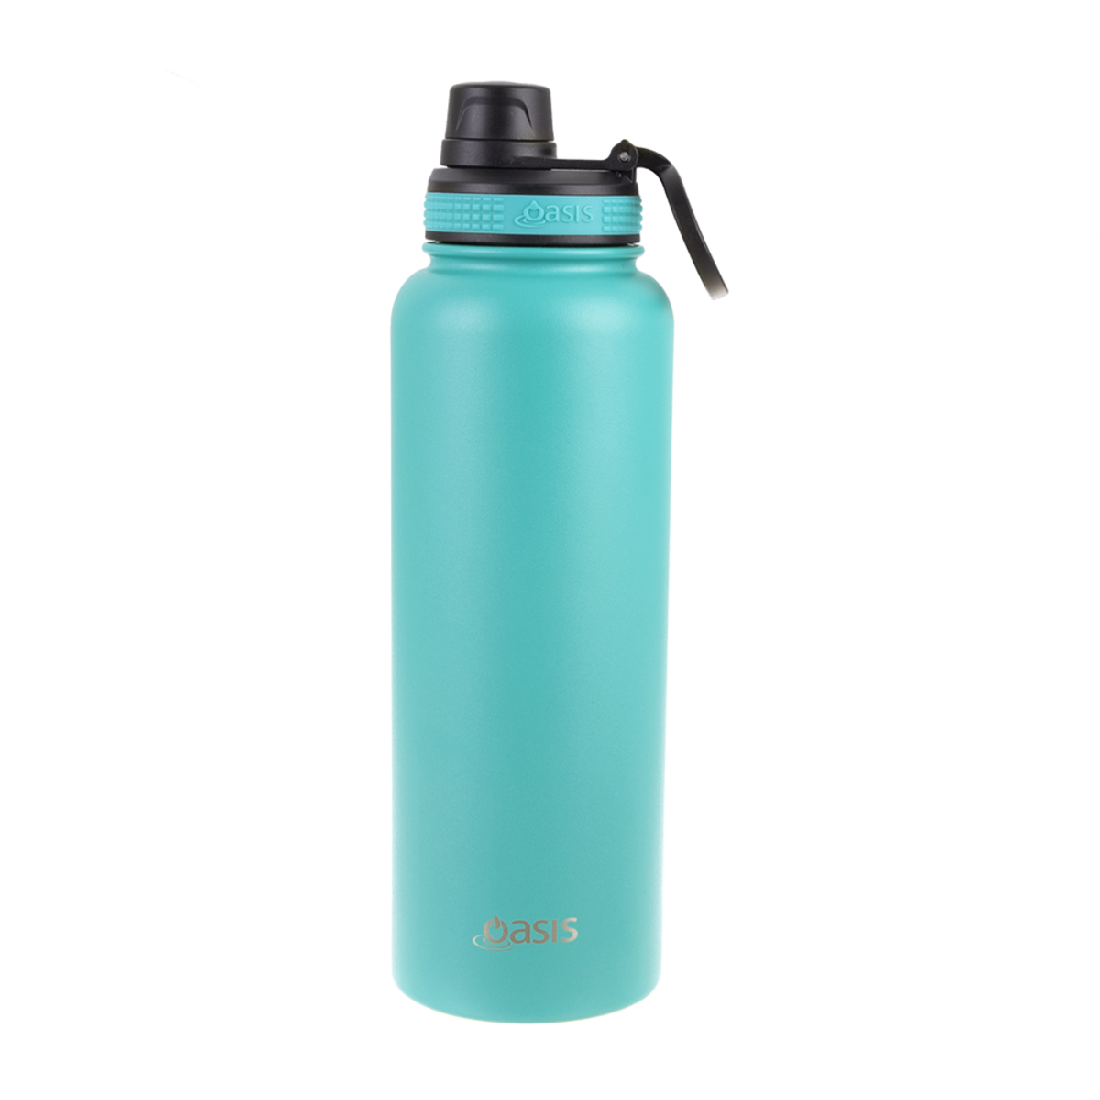 Oasis S/s Double Wall Insulated "challenger" Sports Bottle W/ Screw Cap 1.1l - Turquoise